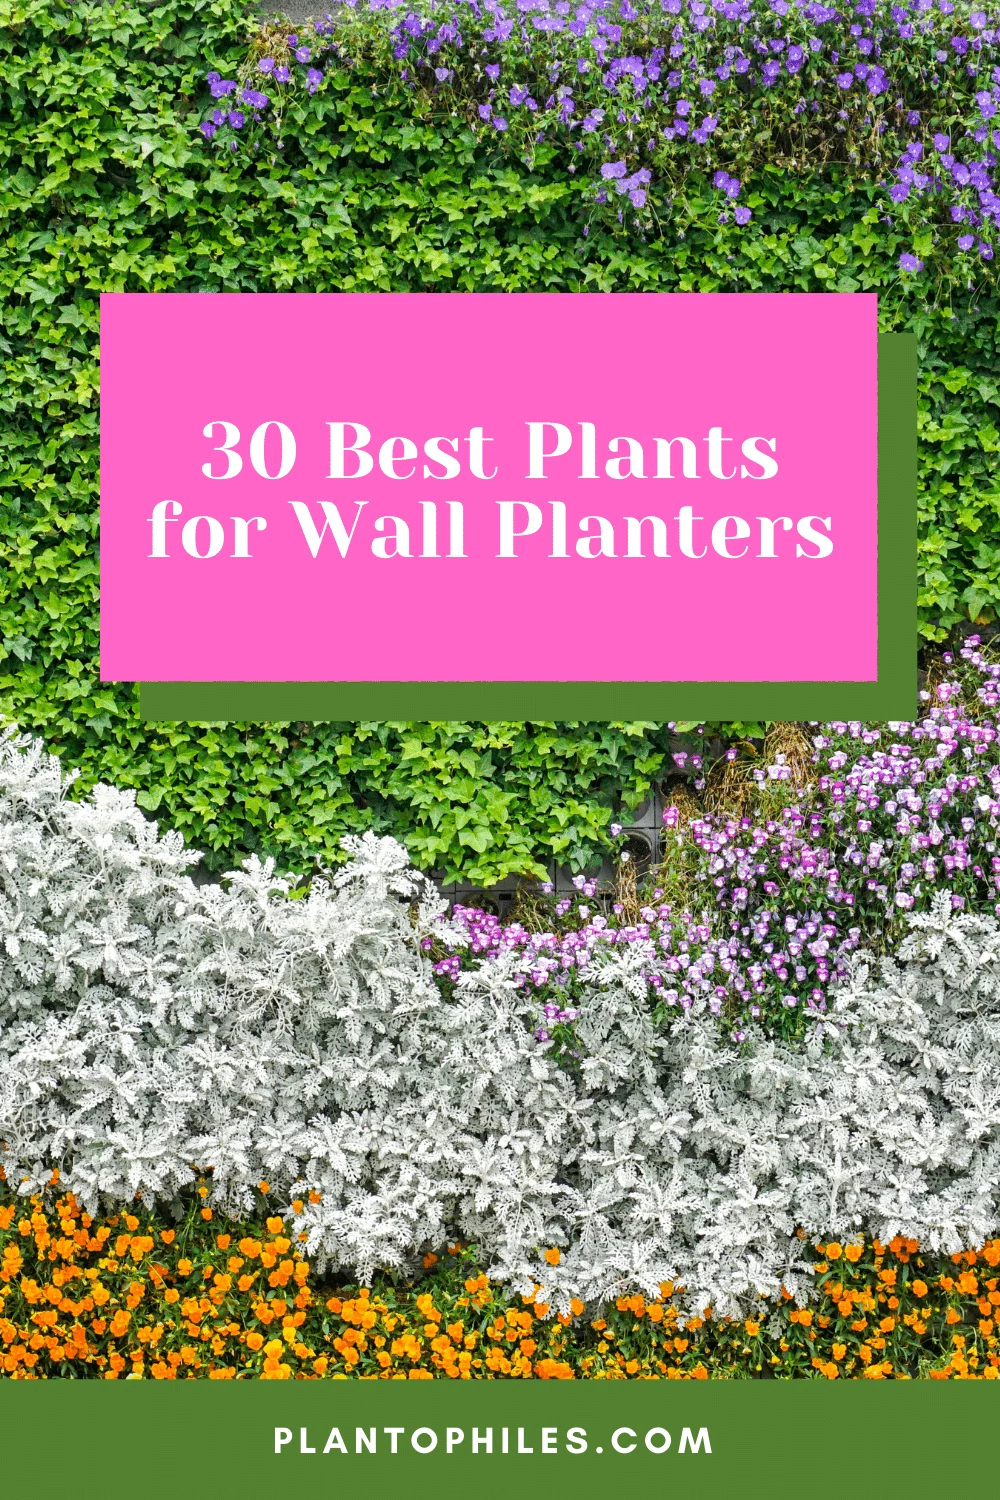 30 Best Plants for Wall Planters